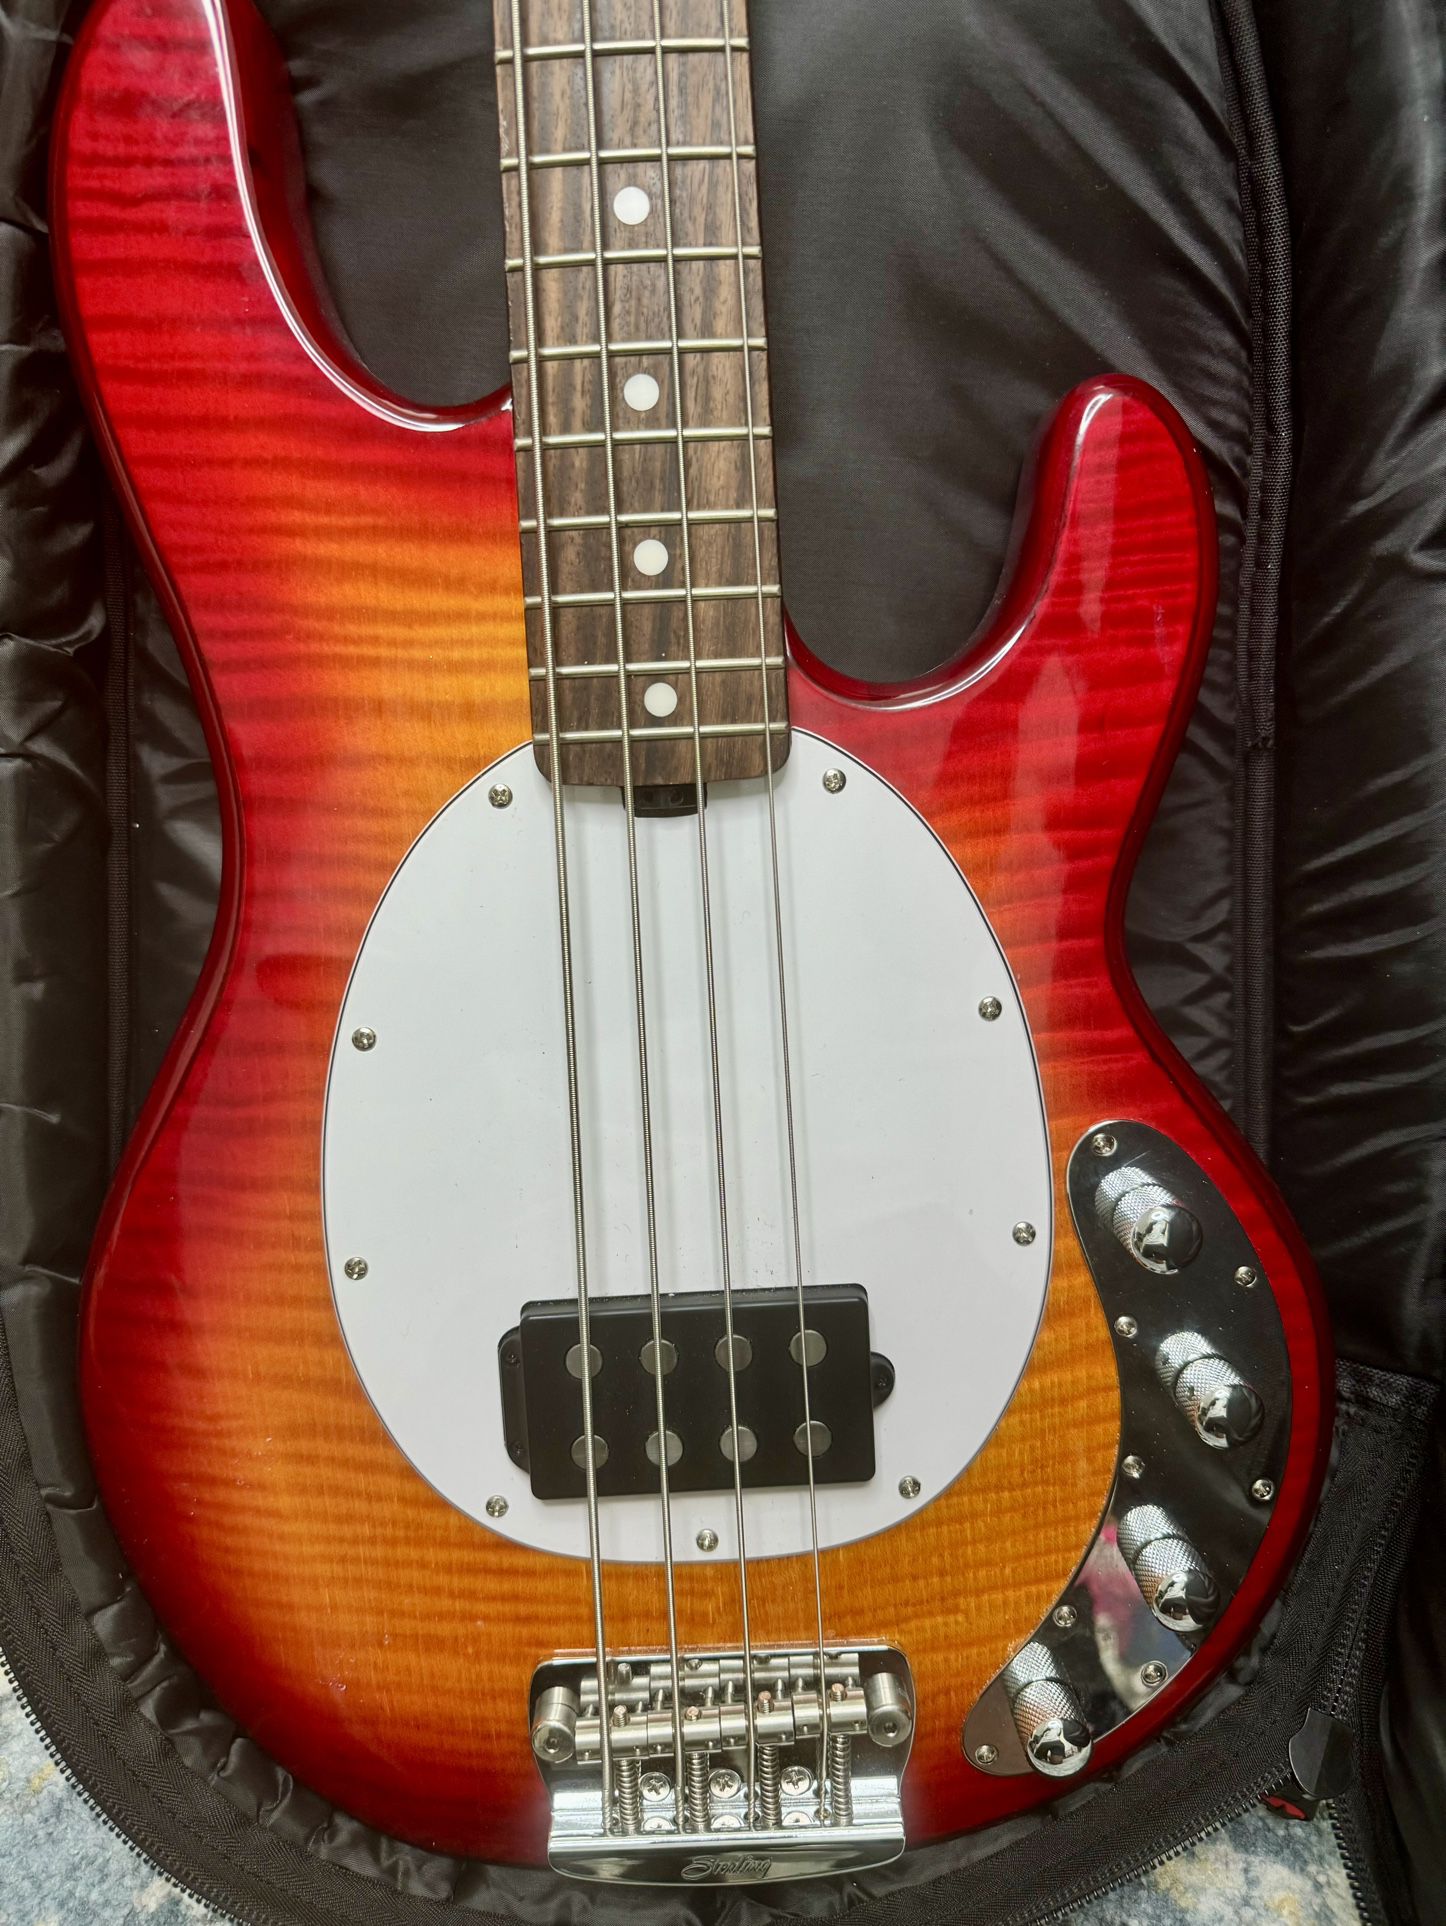 Sterling by Music Man StingRay Bass Guitar & Fender Amp For Sale